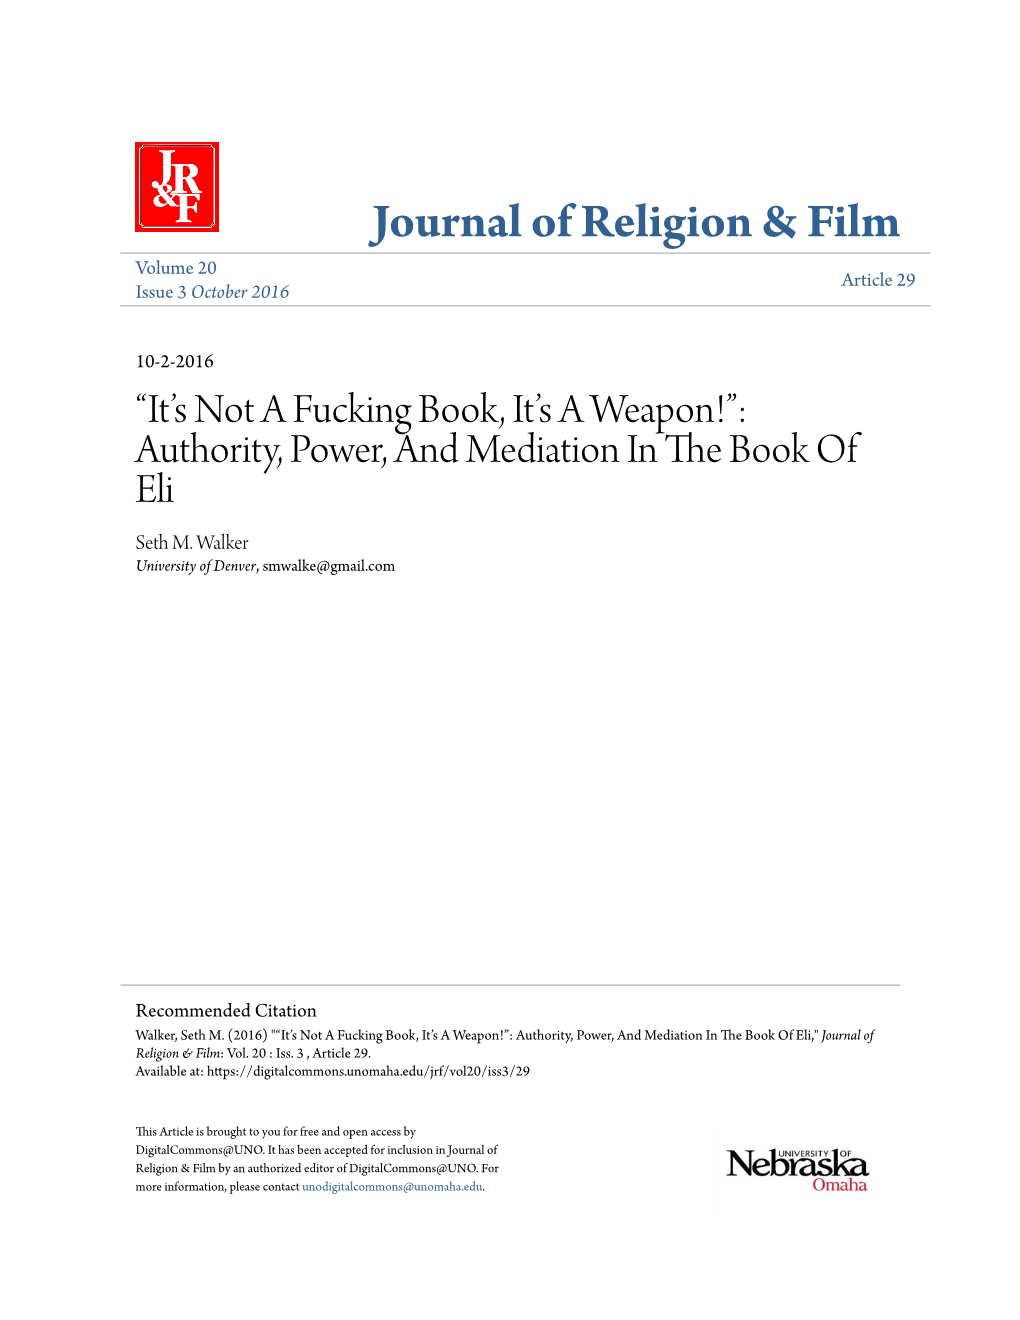 “It's Not a Fucking Book, It's a Weapon!”: Authority, Power, and Mediation in the Book Of